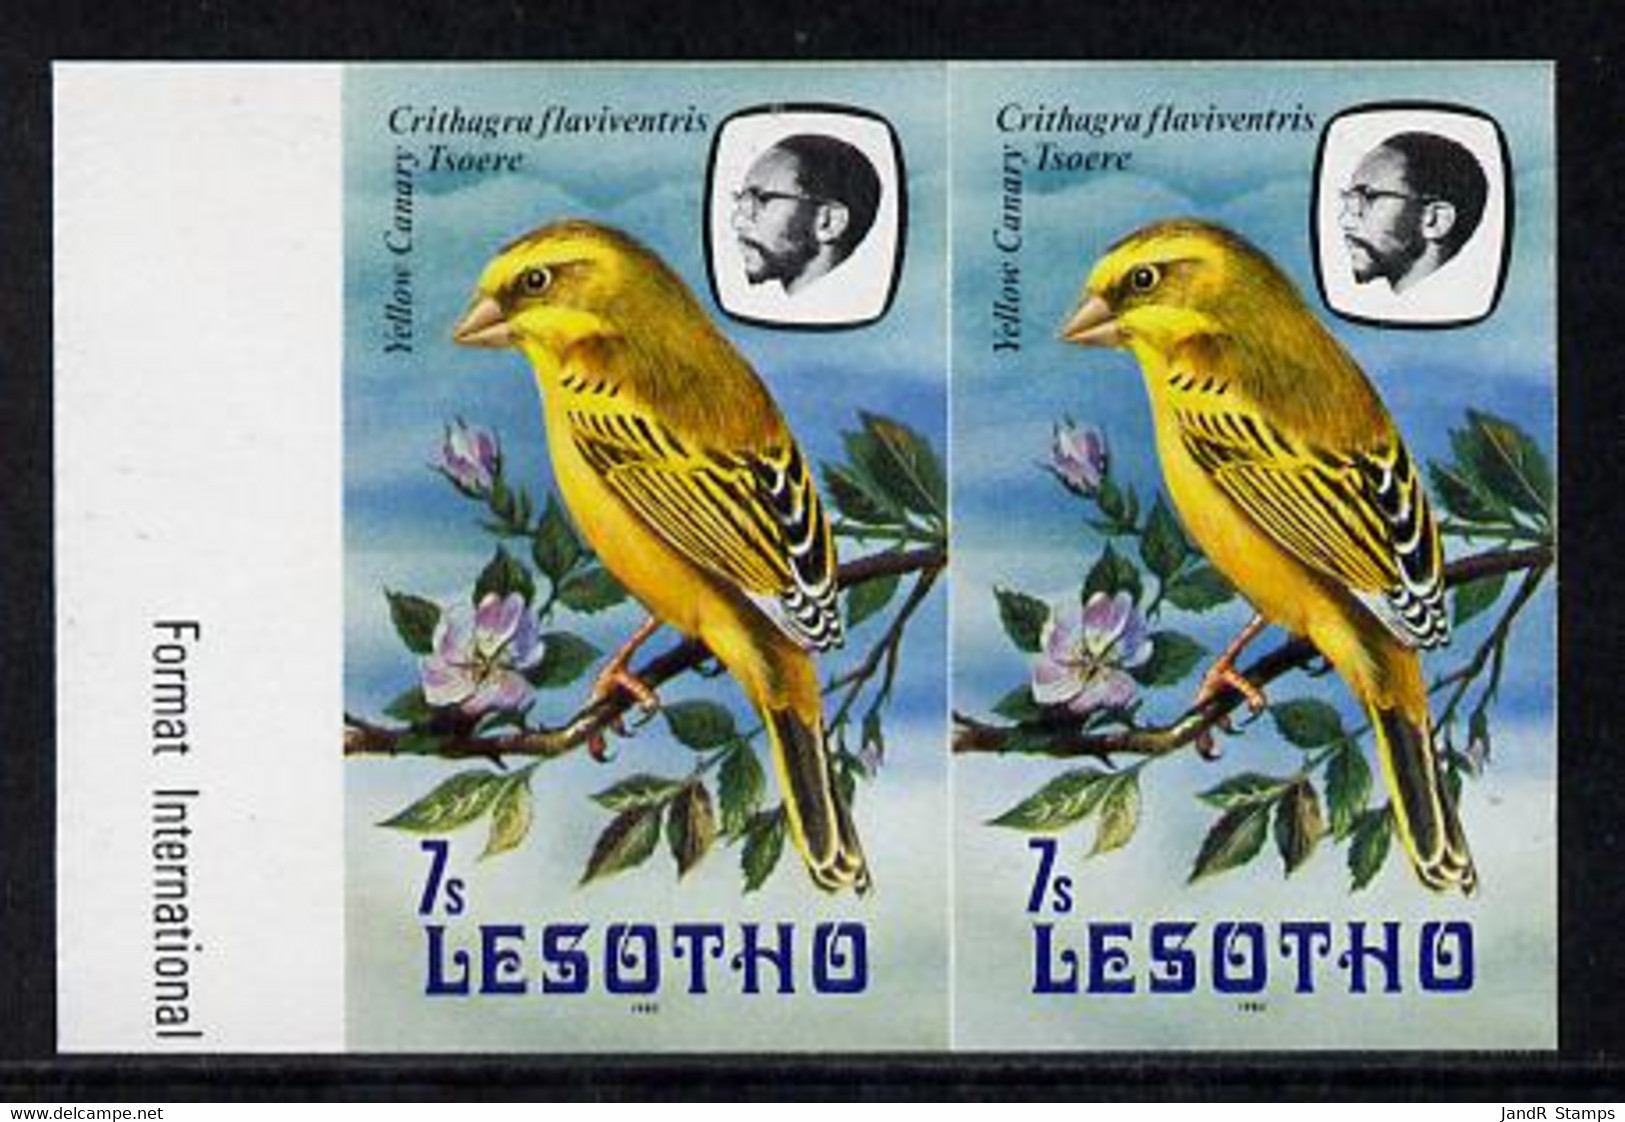 Lesotho 1982 Yellow Canary 7s Def In U/m Imperf Pair* (SG 505) - Lesotho (1966-...)